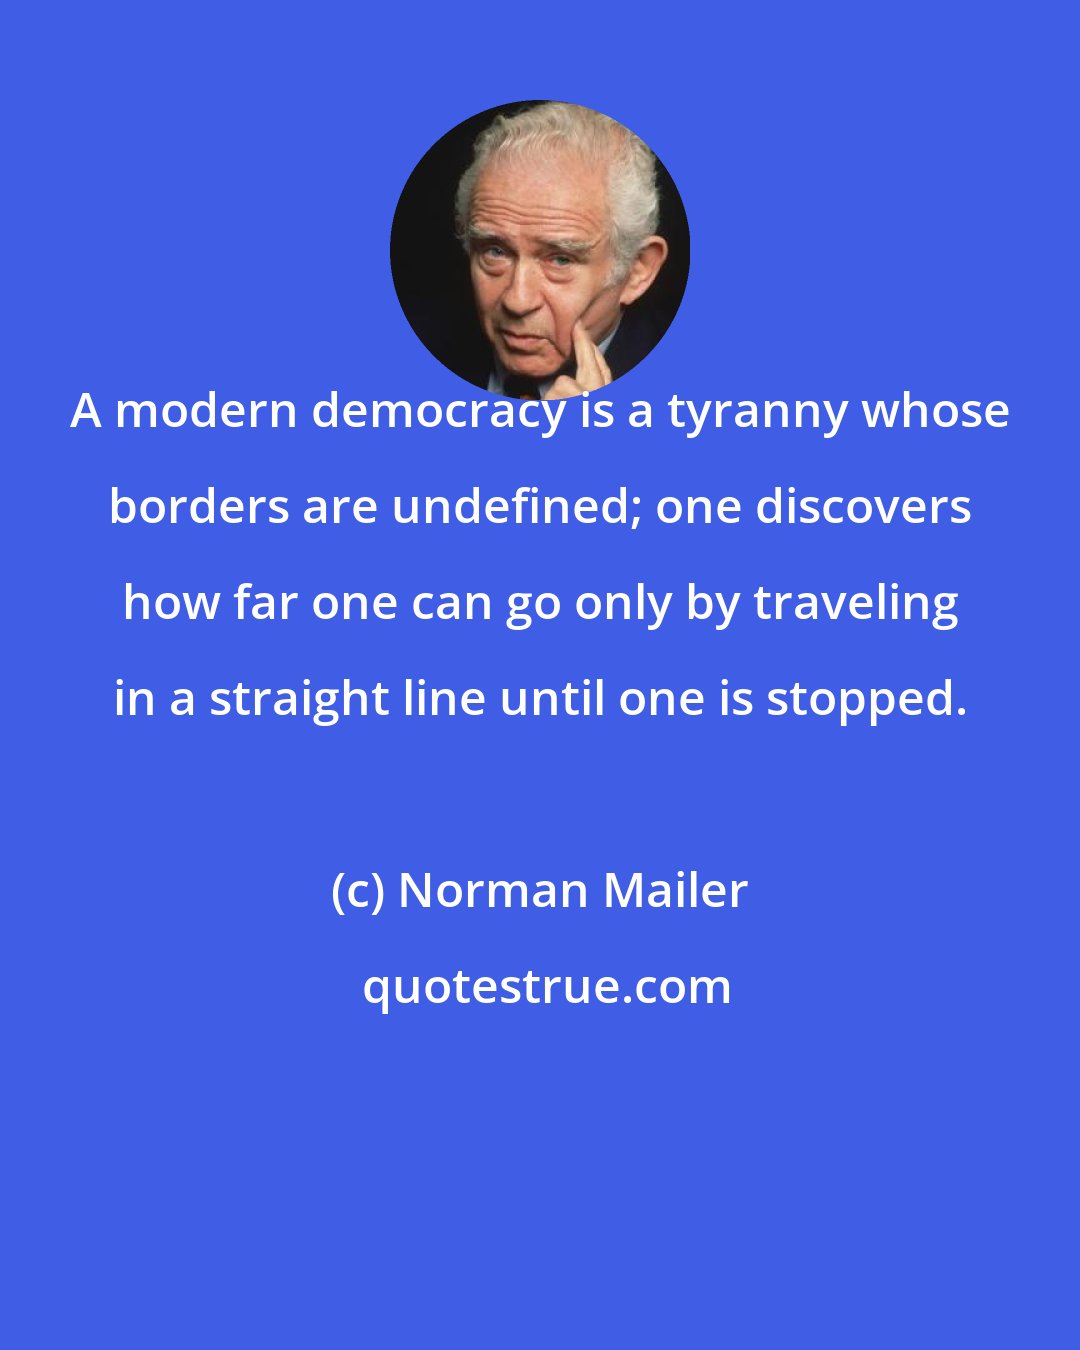 Norman Mailer: A modern democracy is a tyranny whose borders are undefined; one discovers how far one can go only by traveling in a straight line until one is stopped.